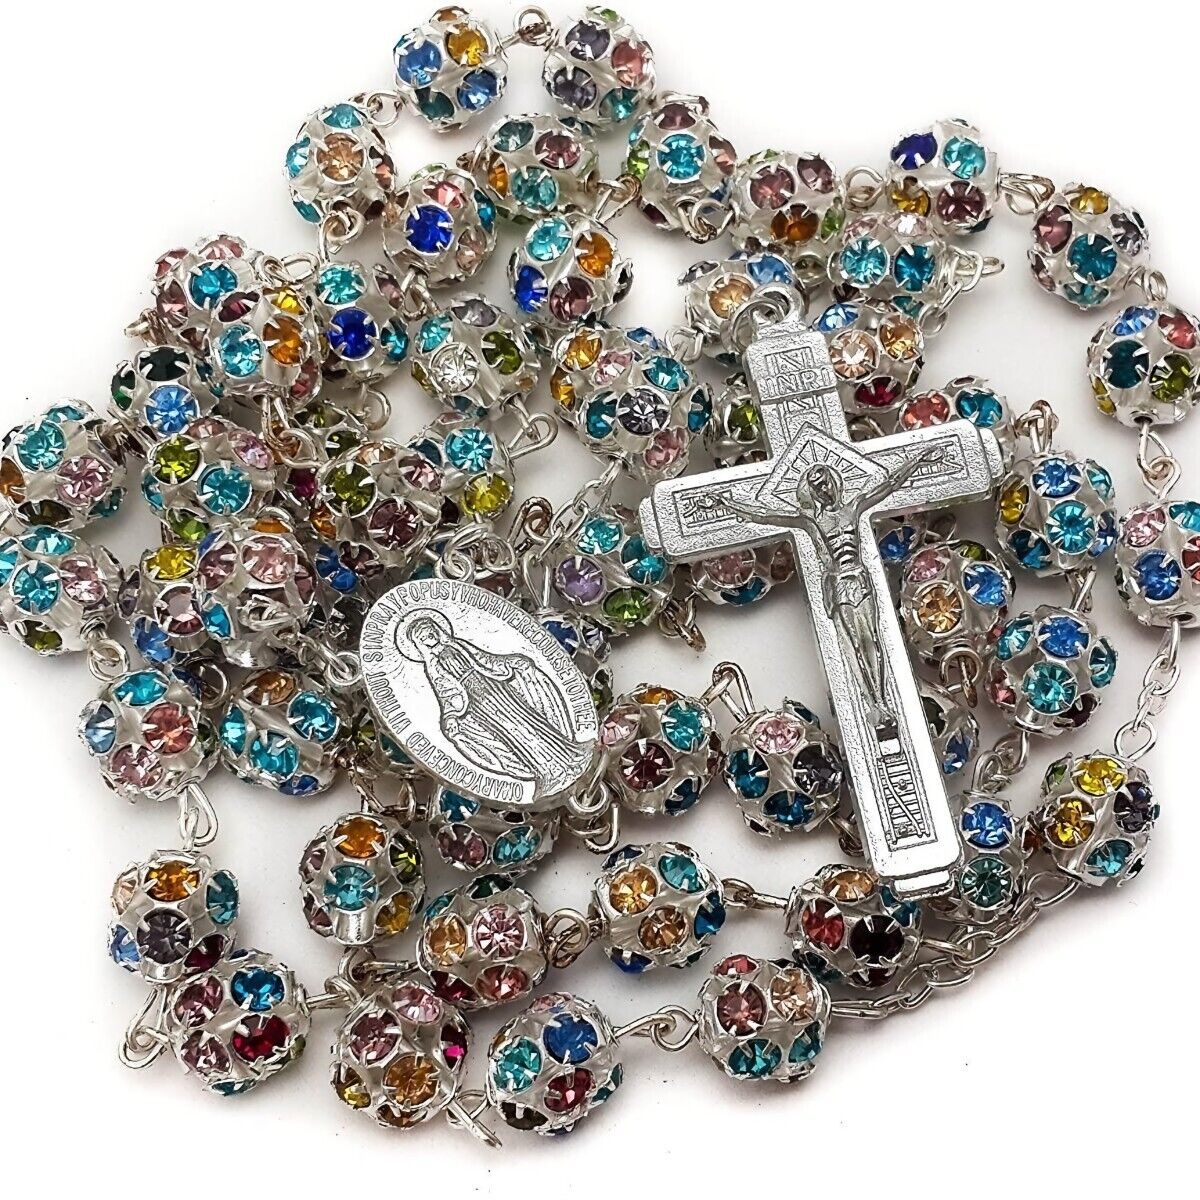 Colorful Crystal Beads Rosary Catholic Necklace from the Holy Land of Jerusalem